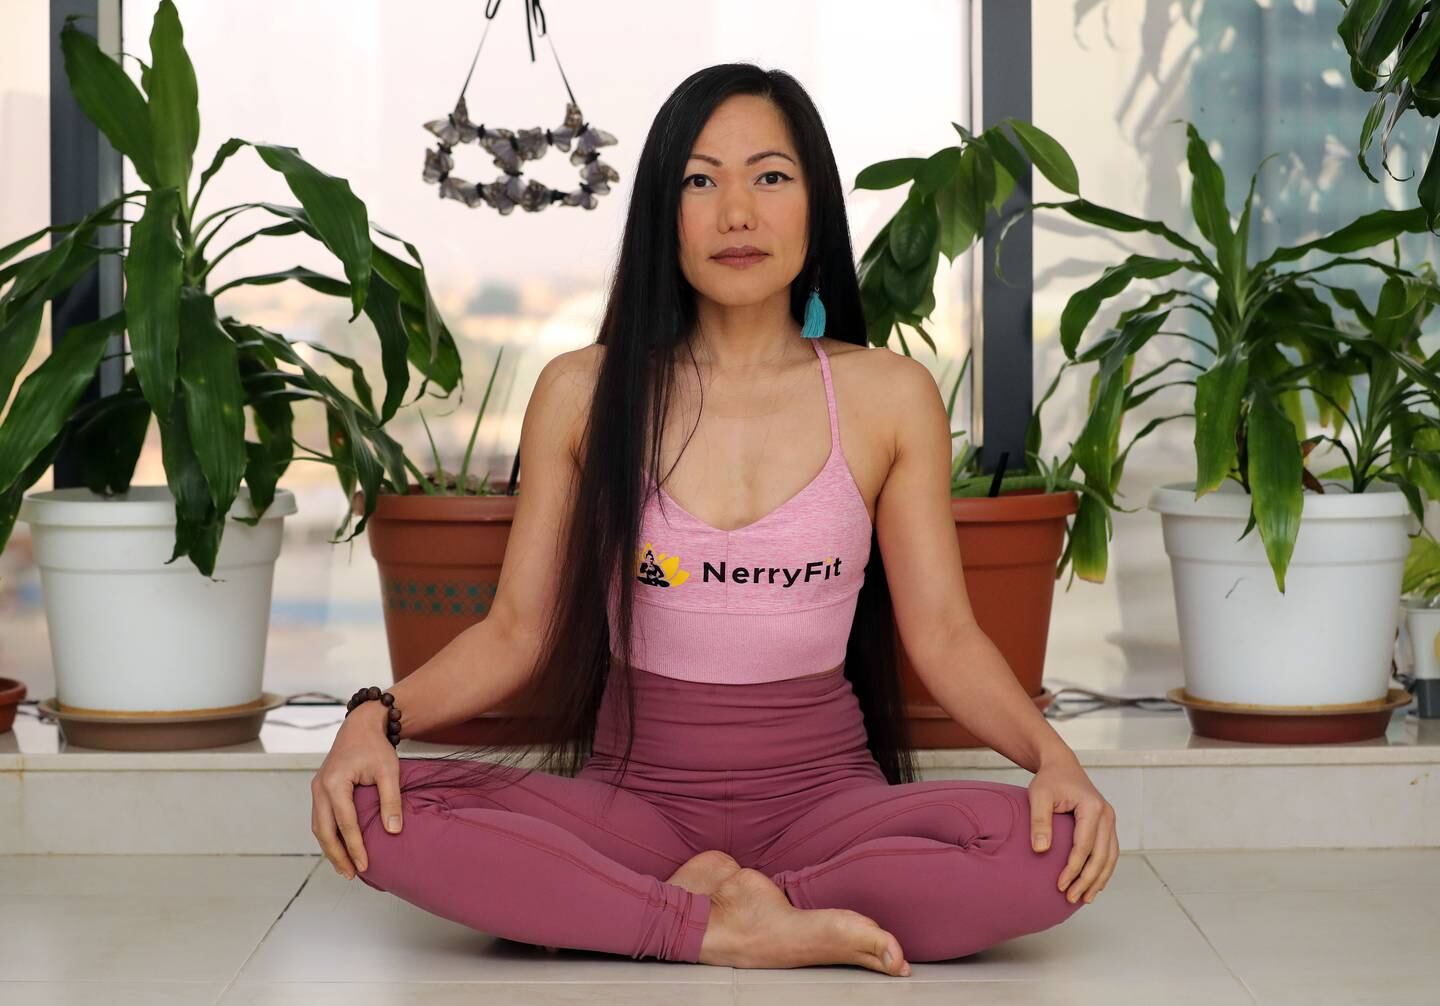 Nerry Toledo, who quit her job to pursue her dream of teaching yoga, derives happiness from knowing what she is doing has a lasting impact and because she chooses not to settle for a mundane existence. Photo: Chris Whiteoak / The National